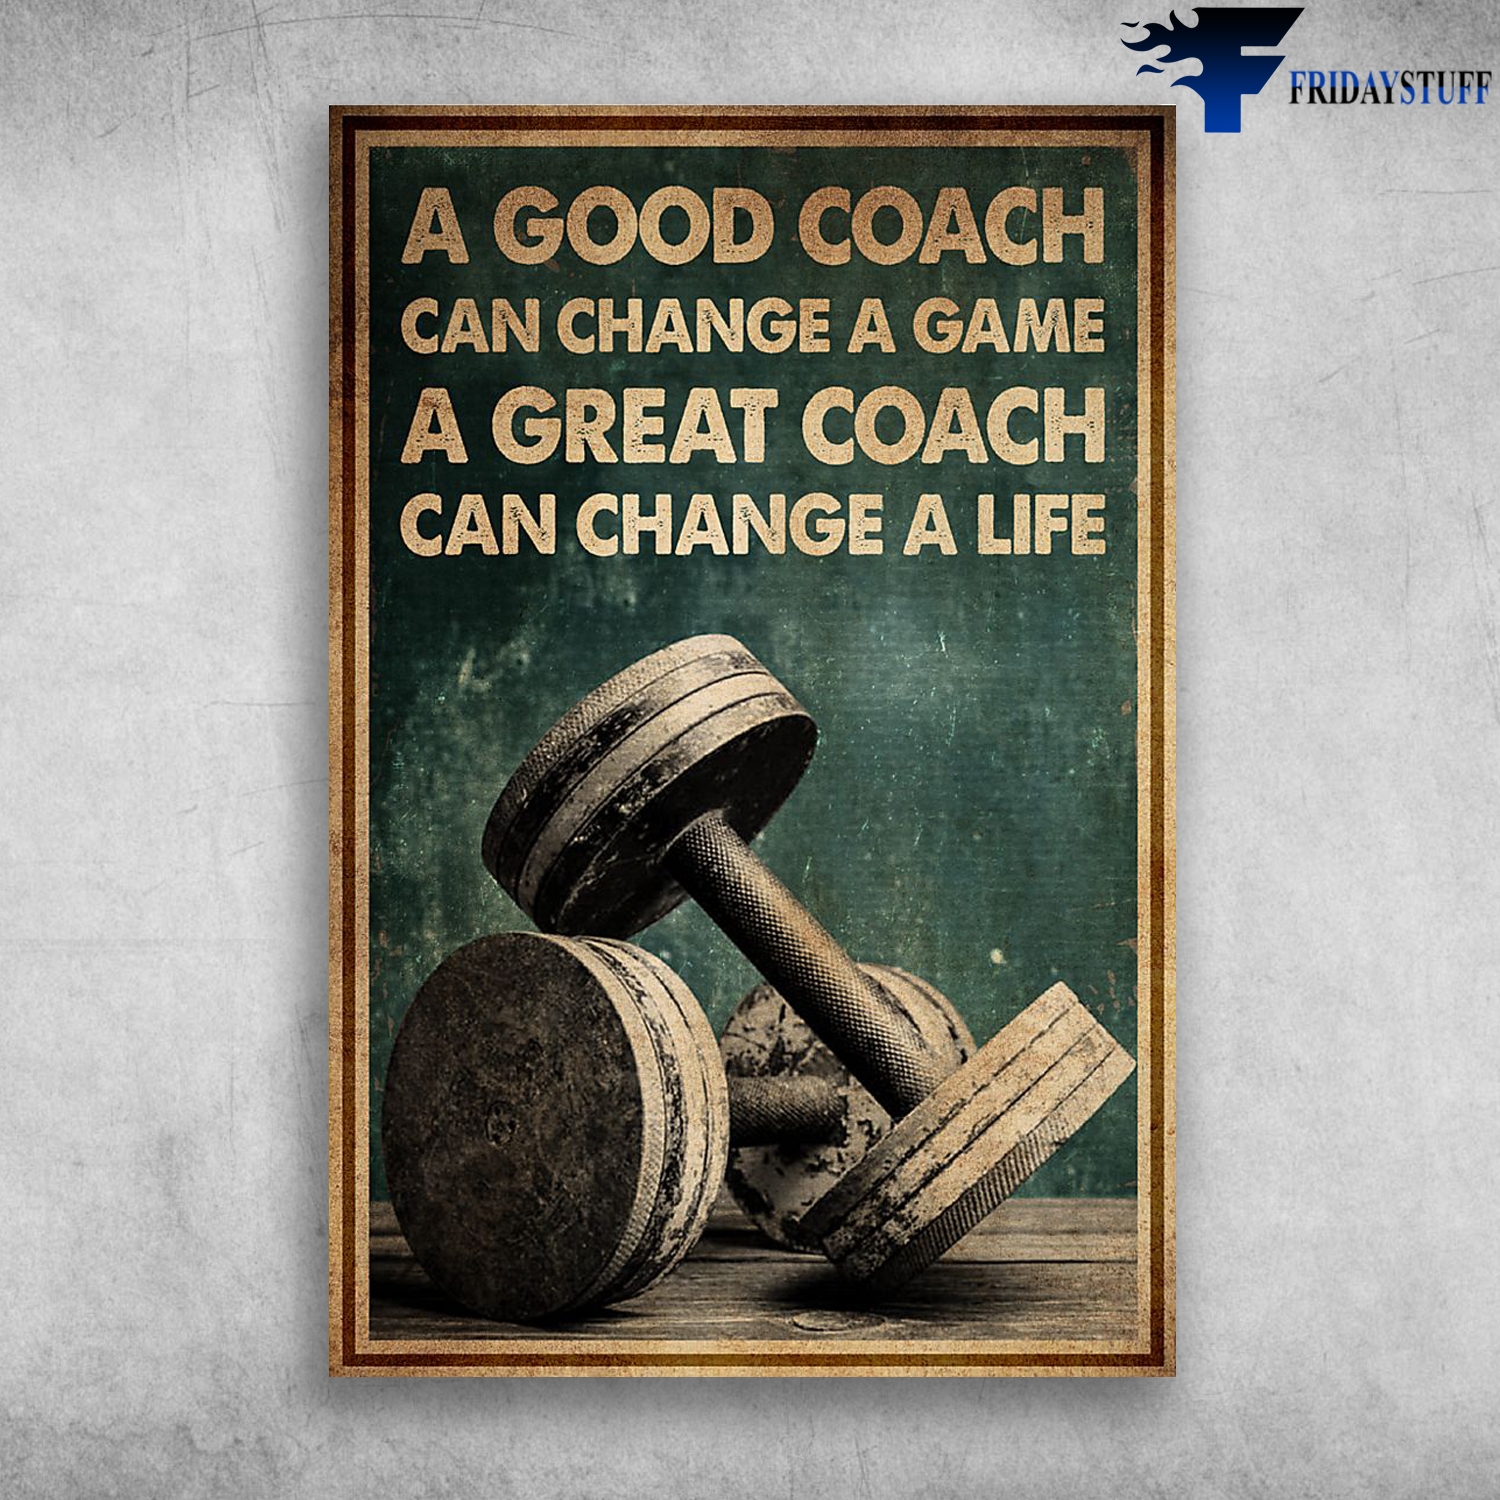 A Good Coach Gym Can Change A Great Coach Can Change A Life - FridayStuff